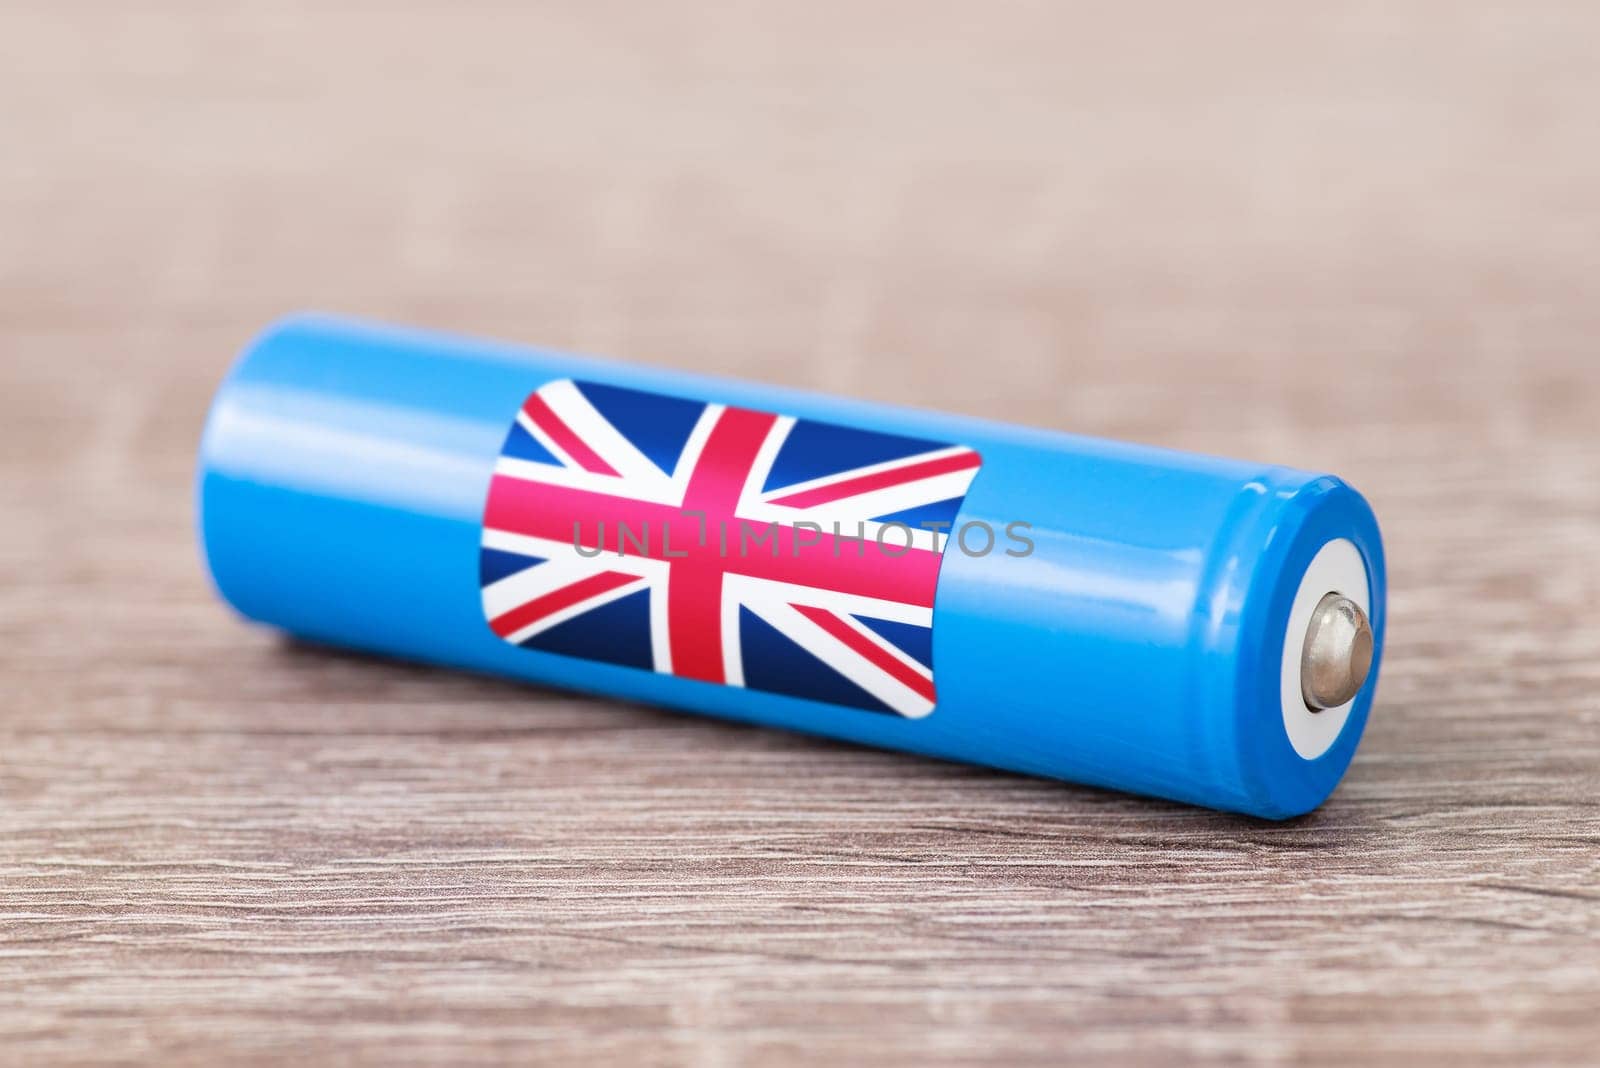 Production of lithium batteries in United Kingdom